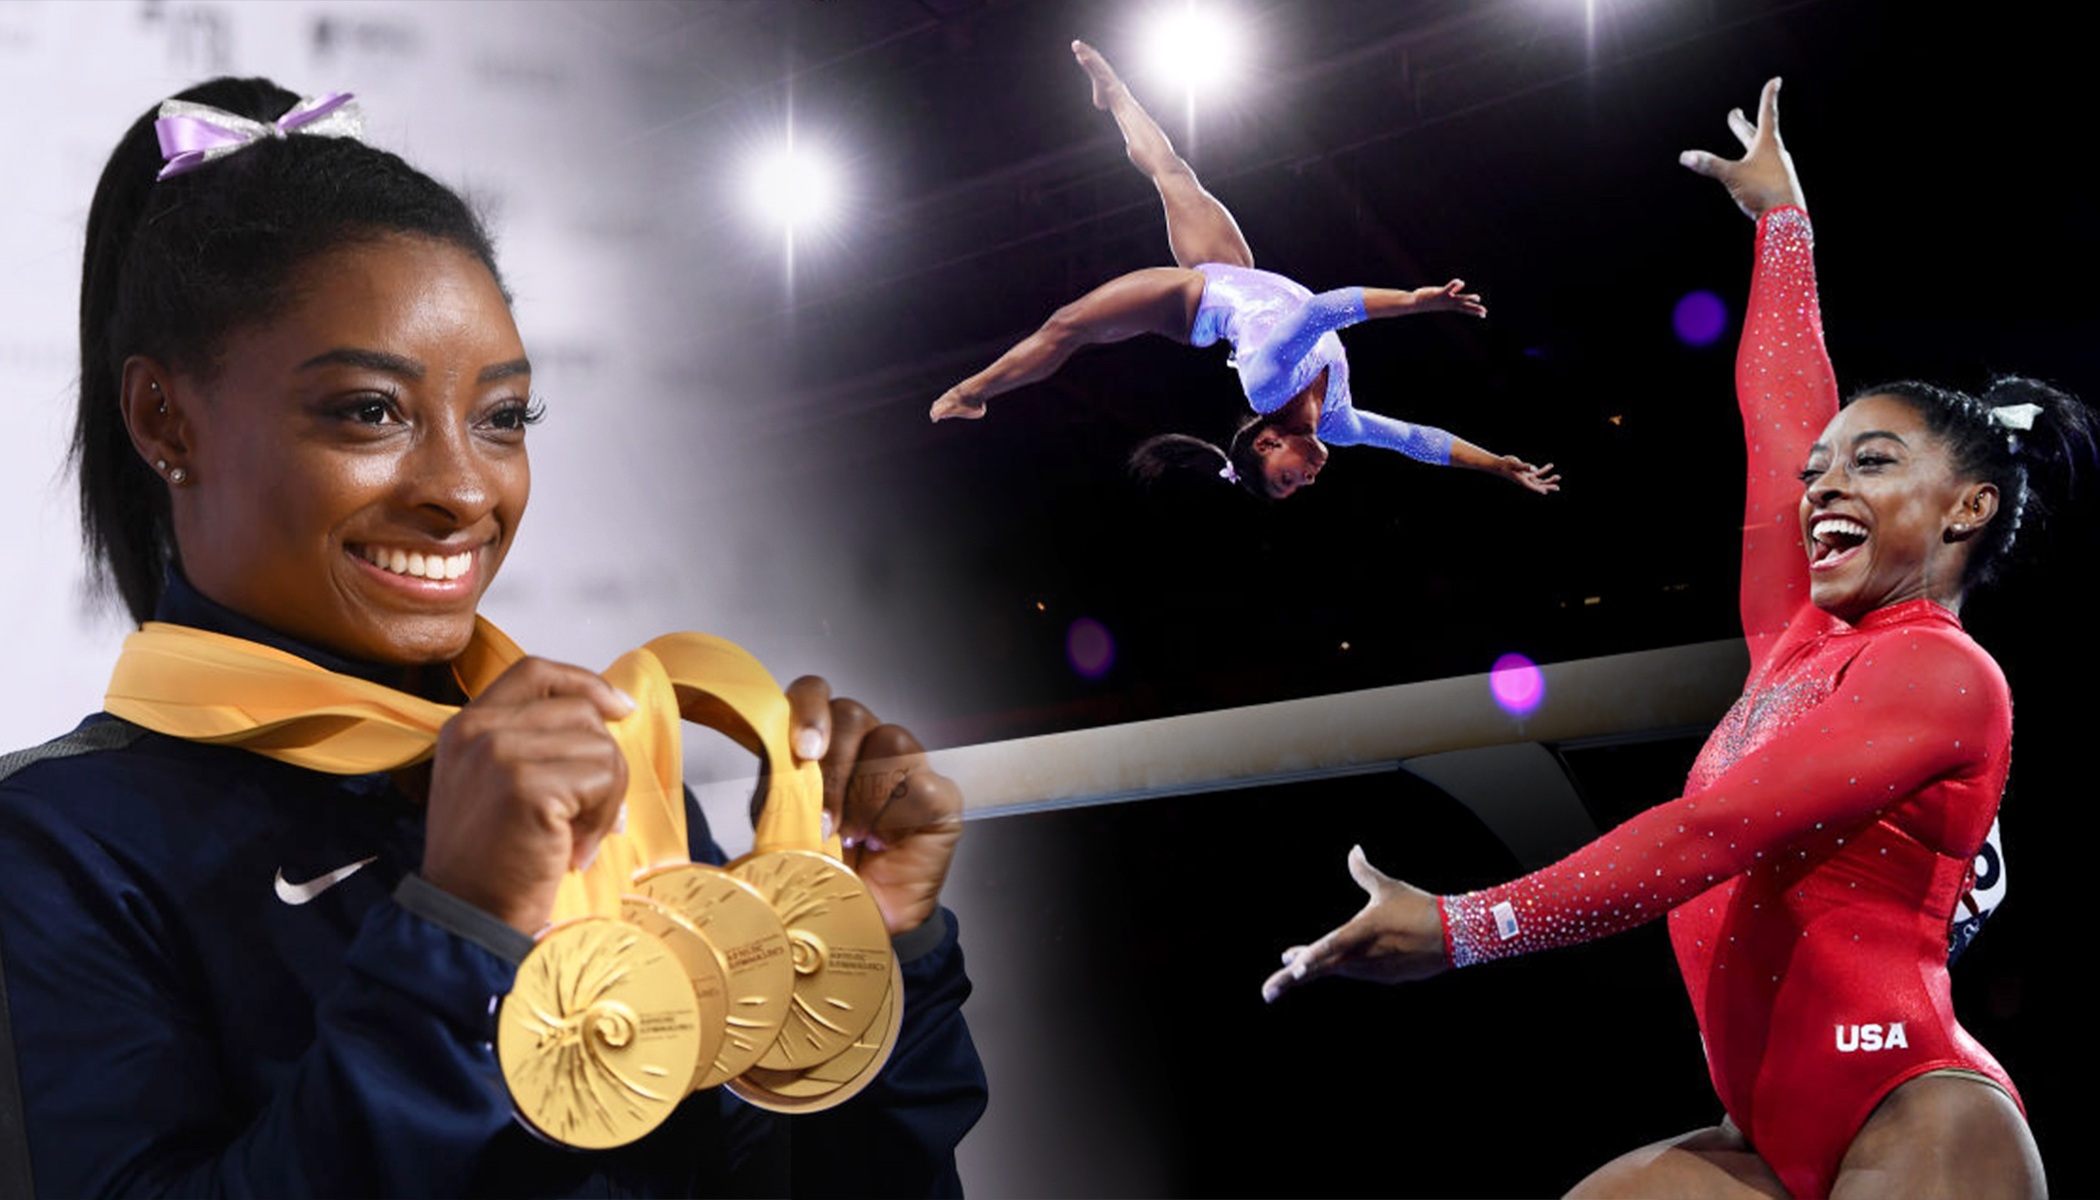 Simone Biles Racks Up More Gold Medals Than Her Age After World Championship Gymnastics